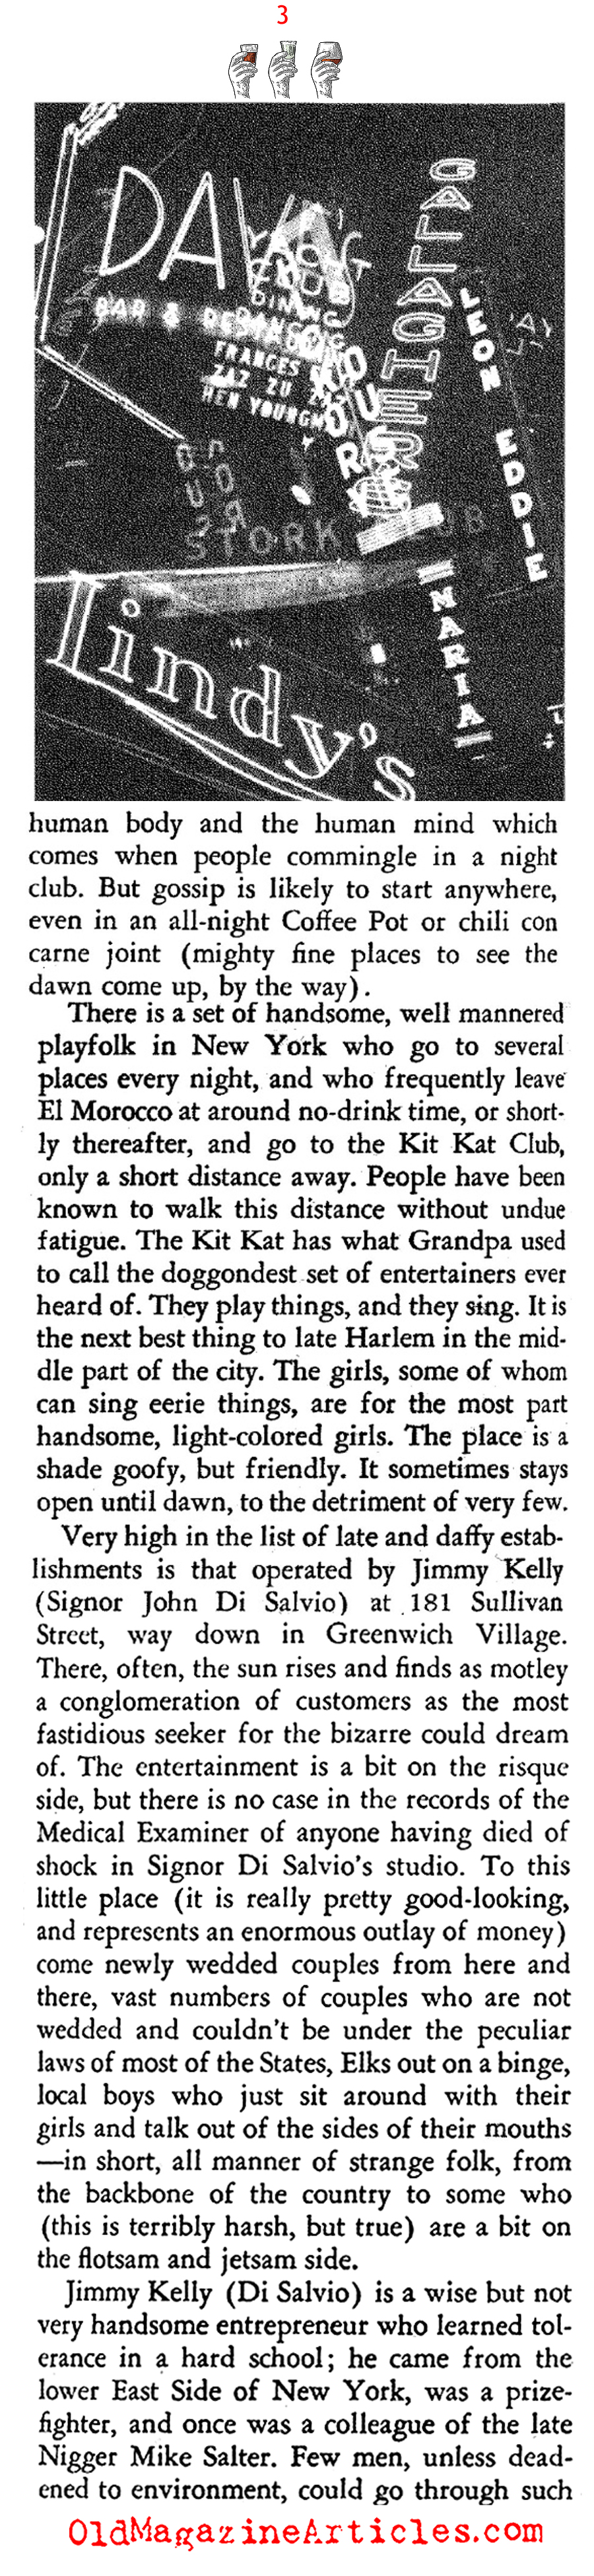 New York City Bars at Four in the Morning... (Stage Magazine, 1937)